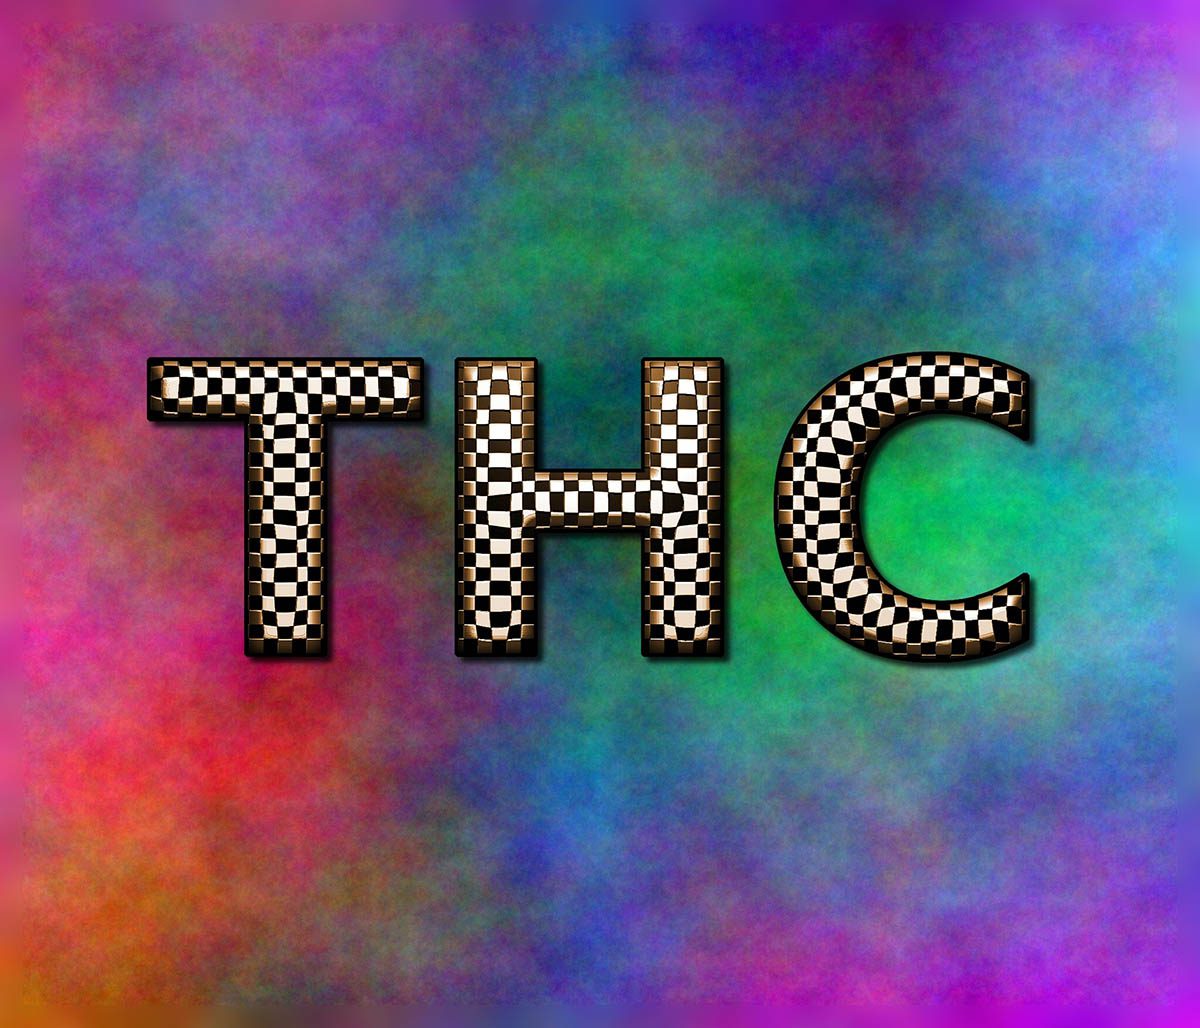 How long does THC stay in the saliva?